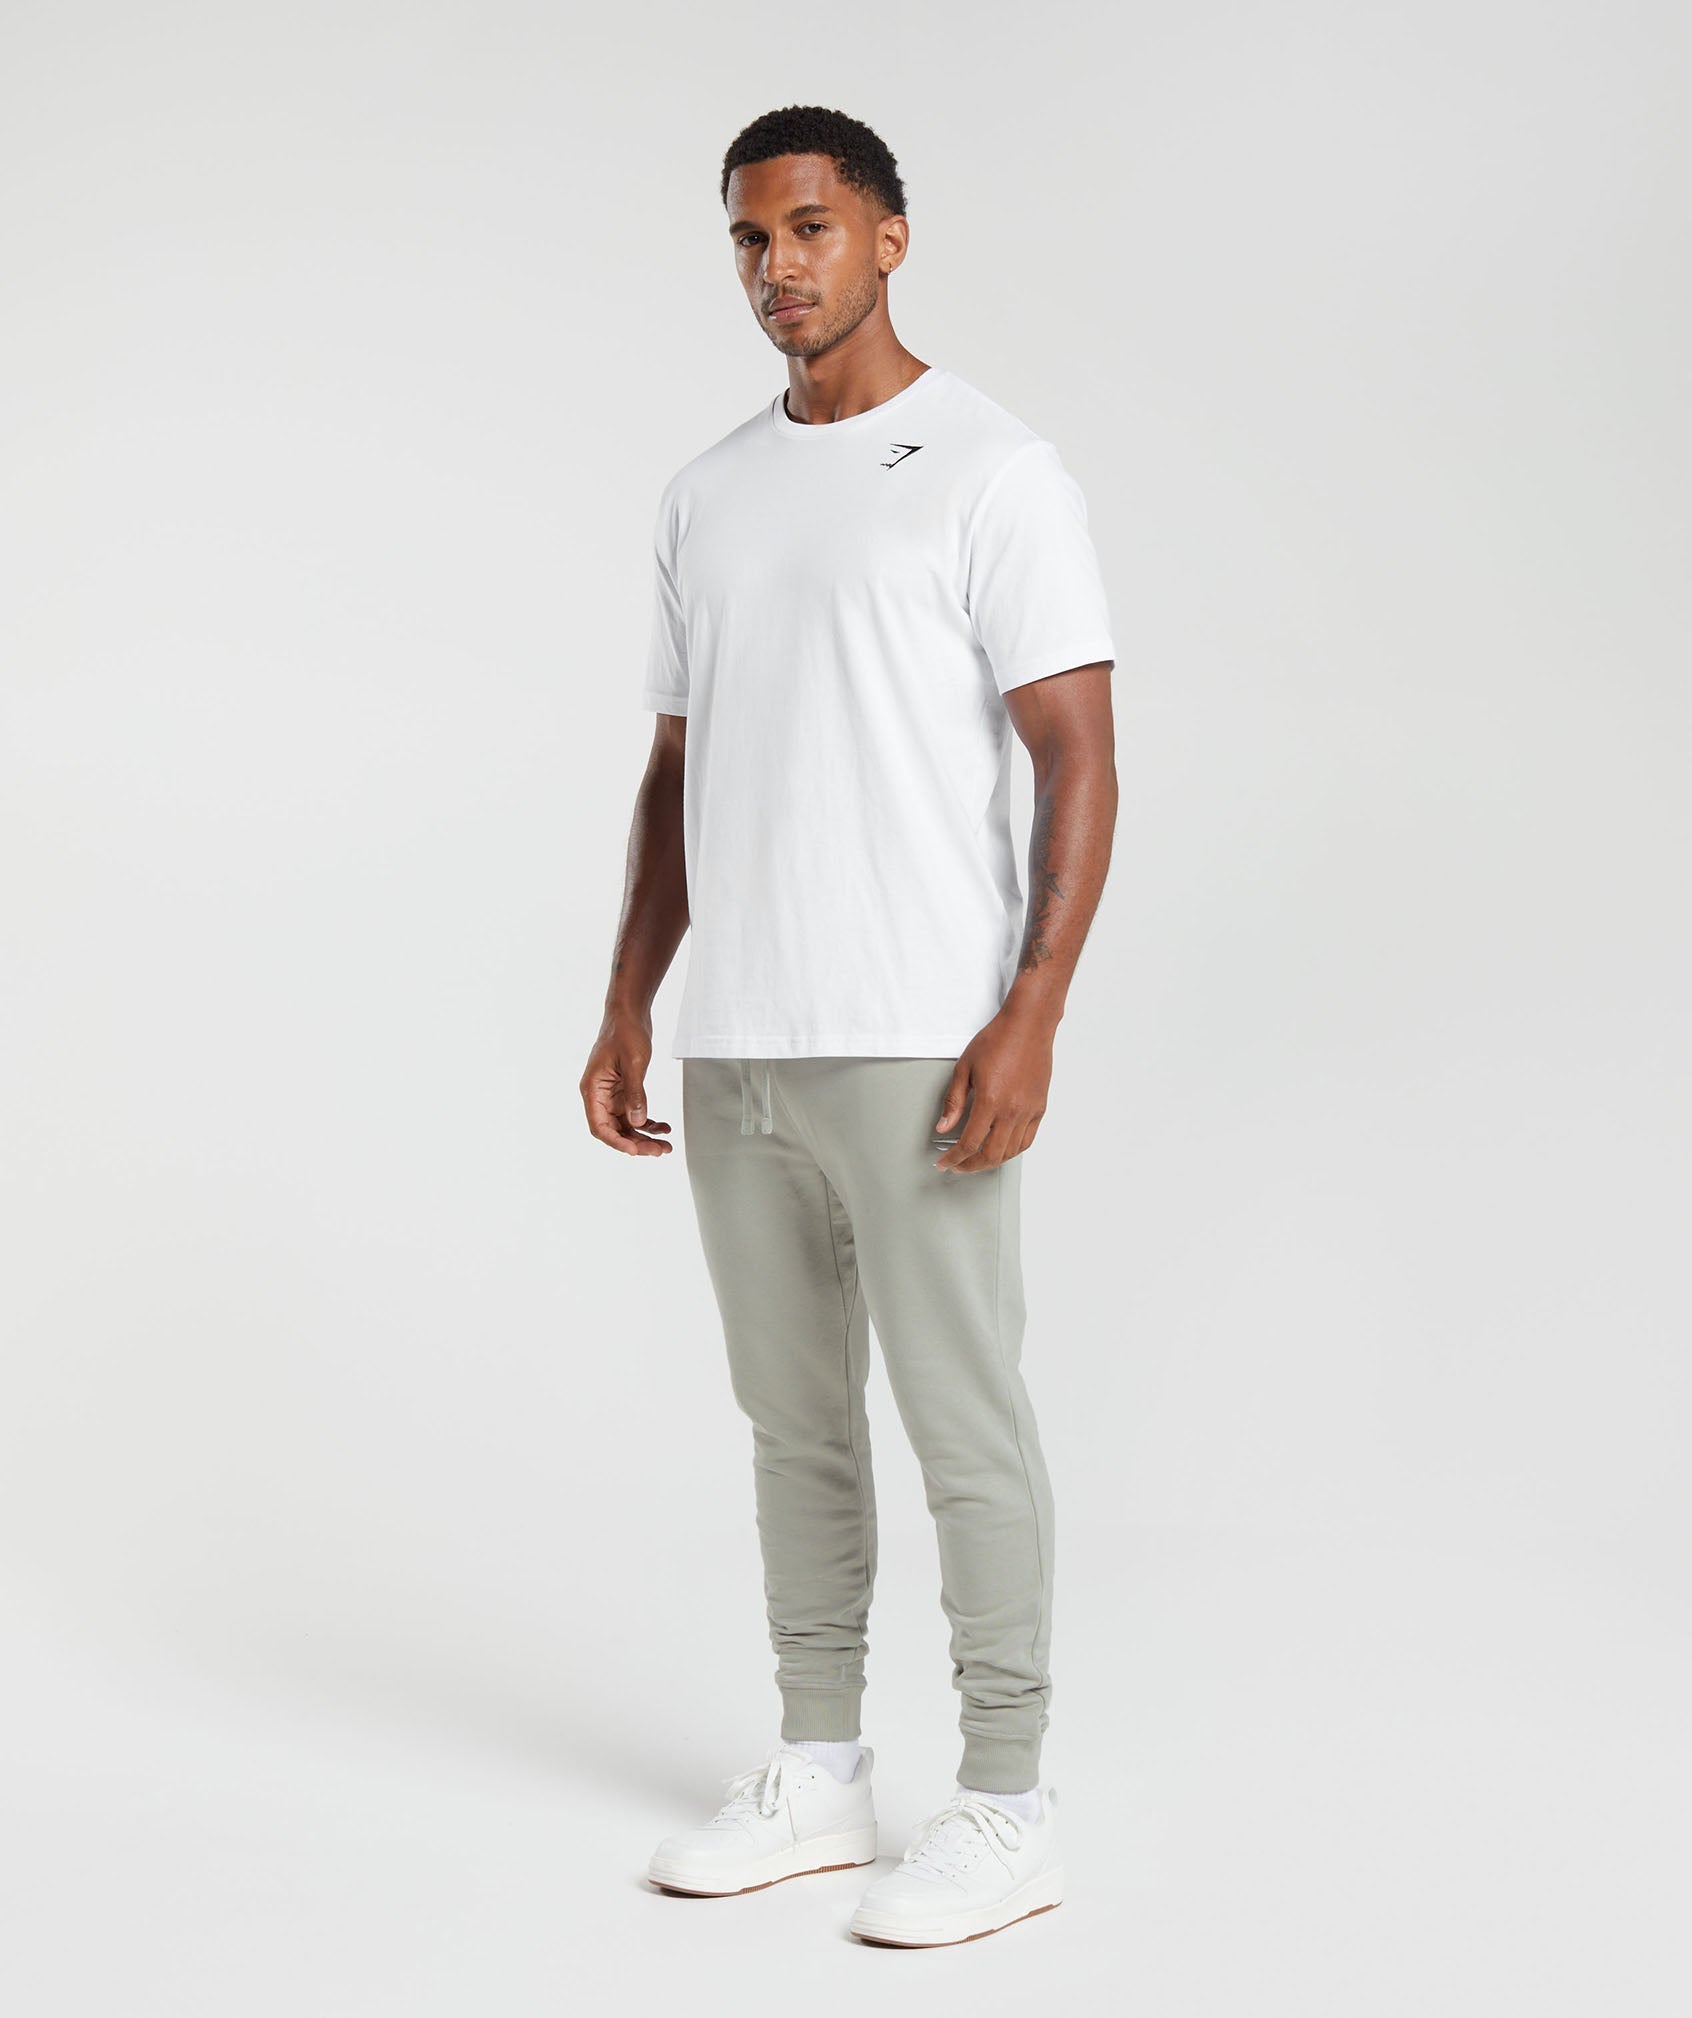 Crest Joggers in Stone Grey - view 4